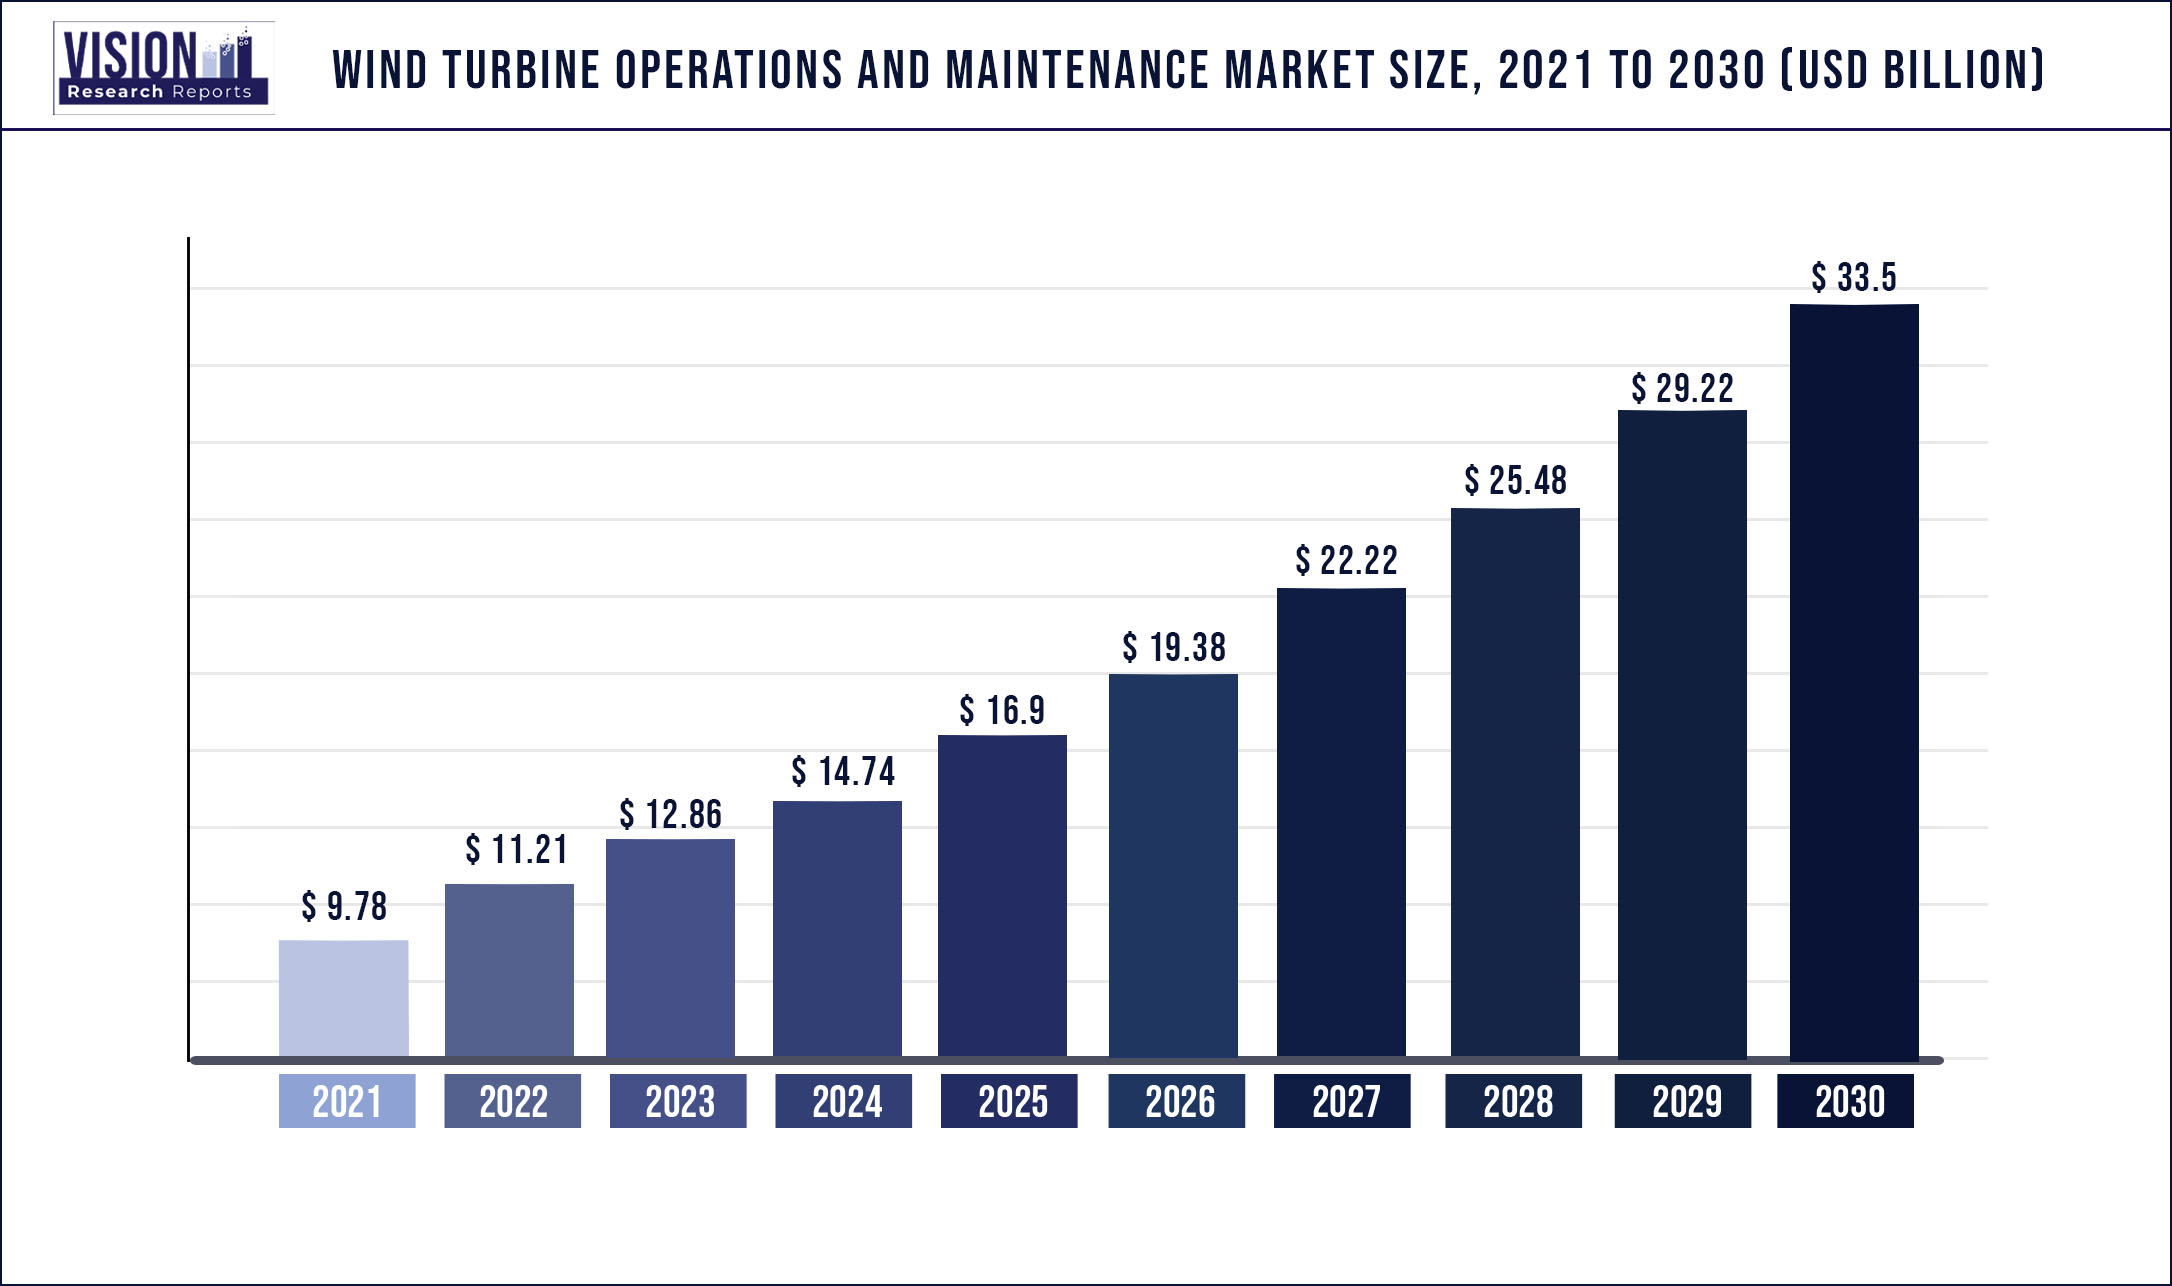 Wind Turbine Operations and Maintenance Market Size 2021 to 2030